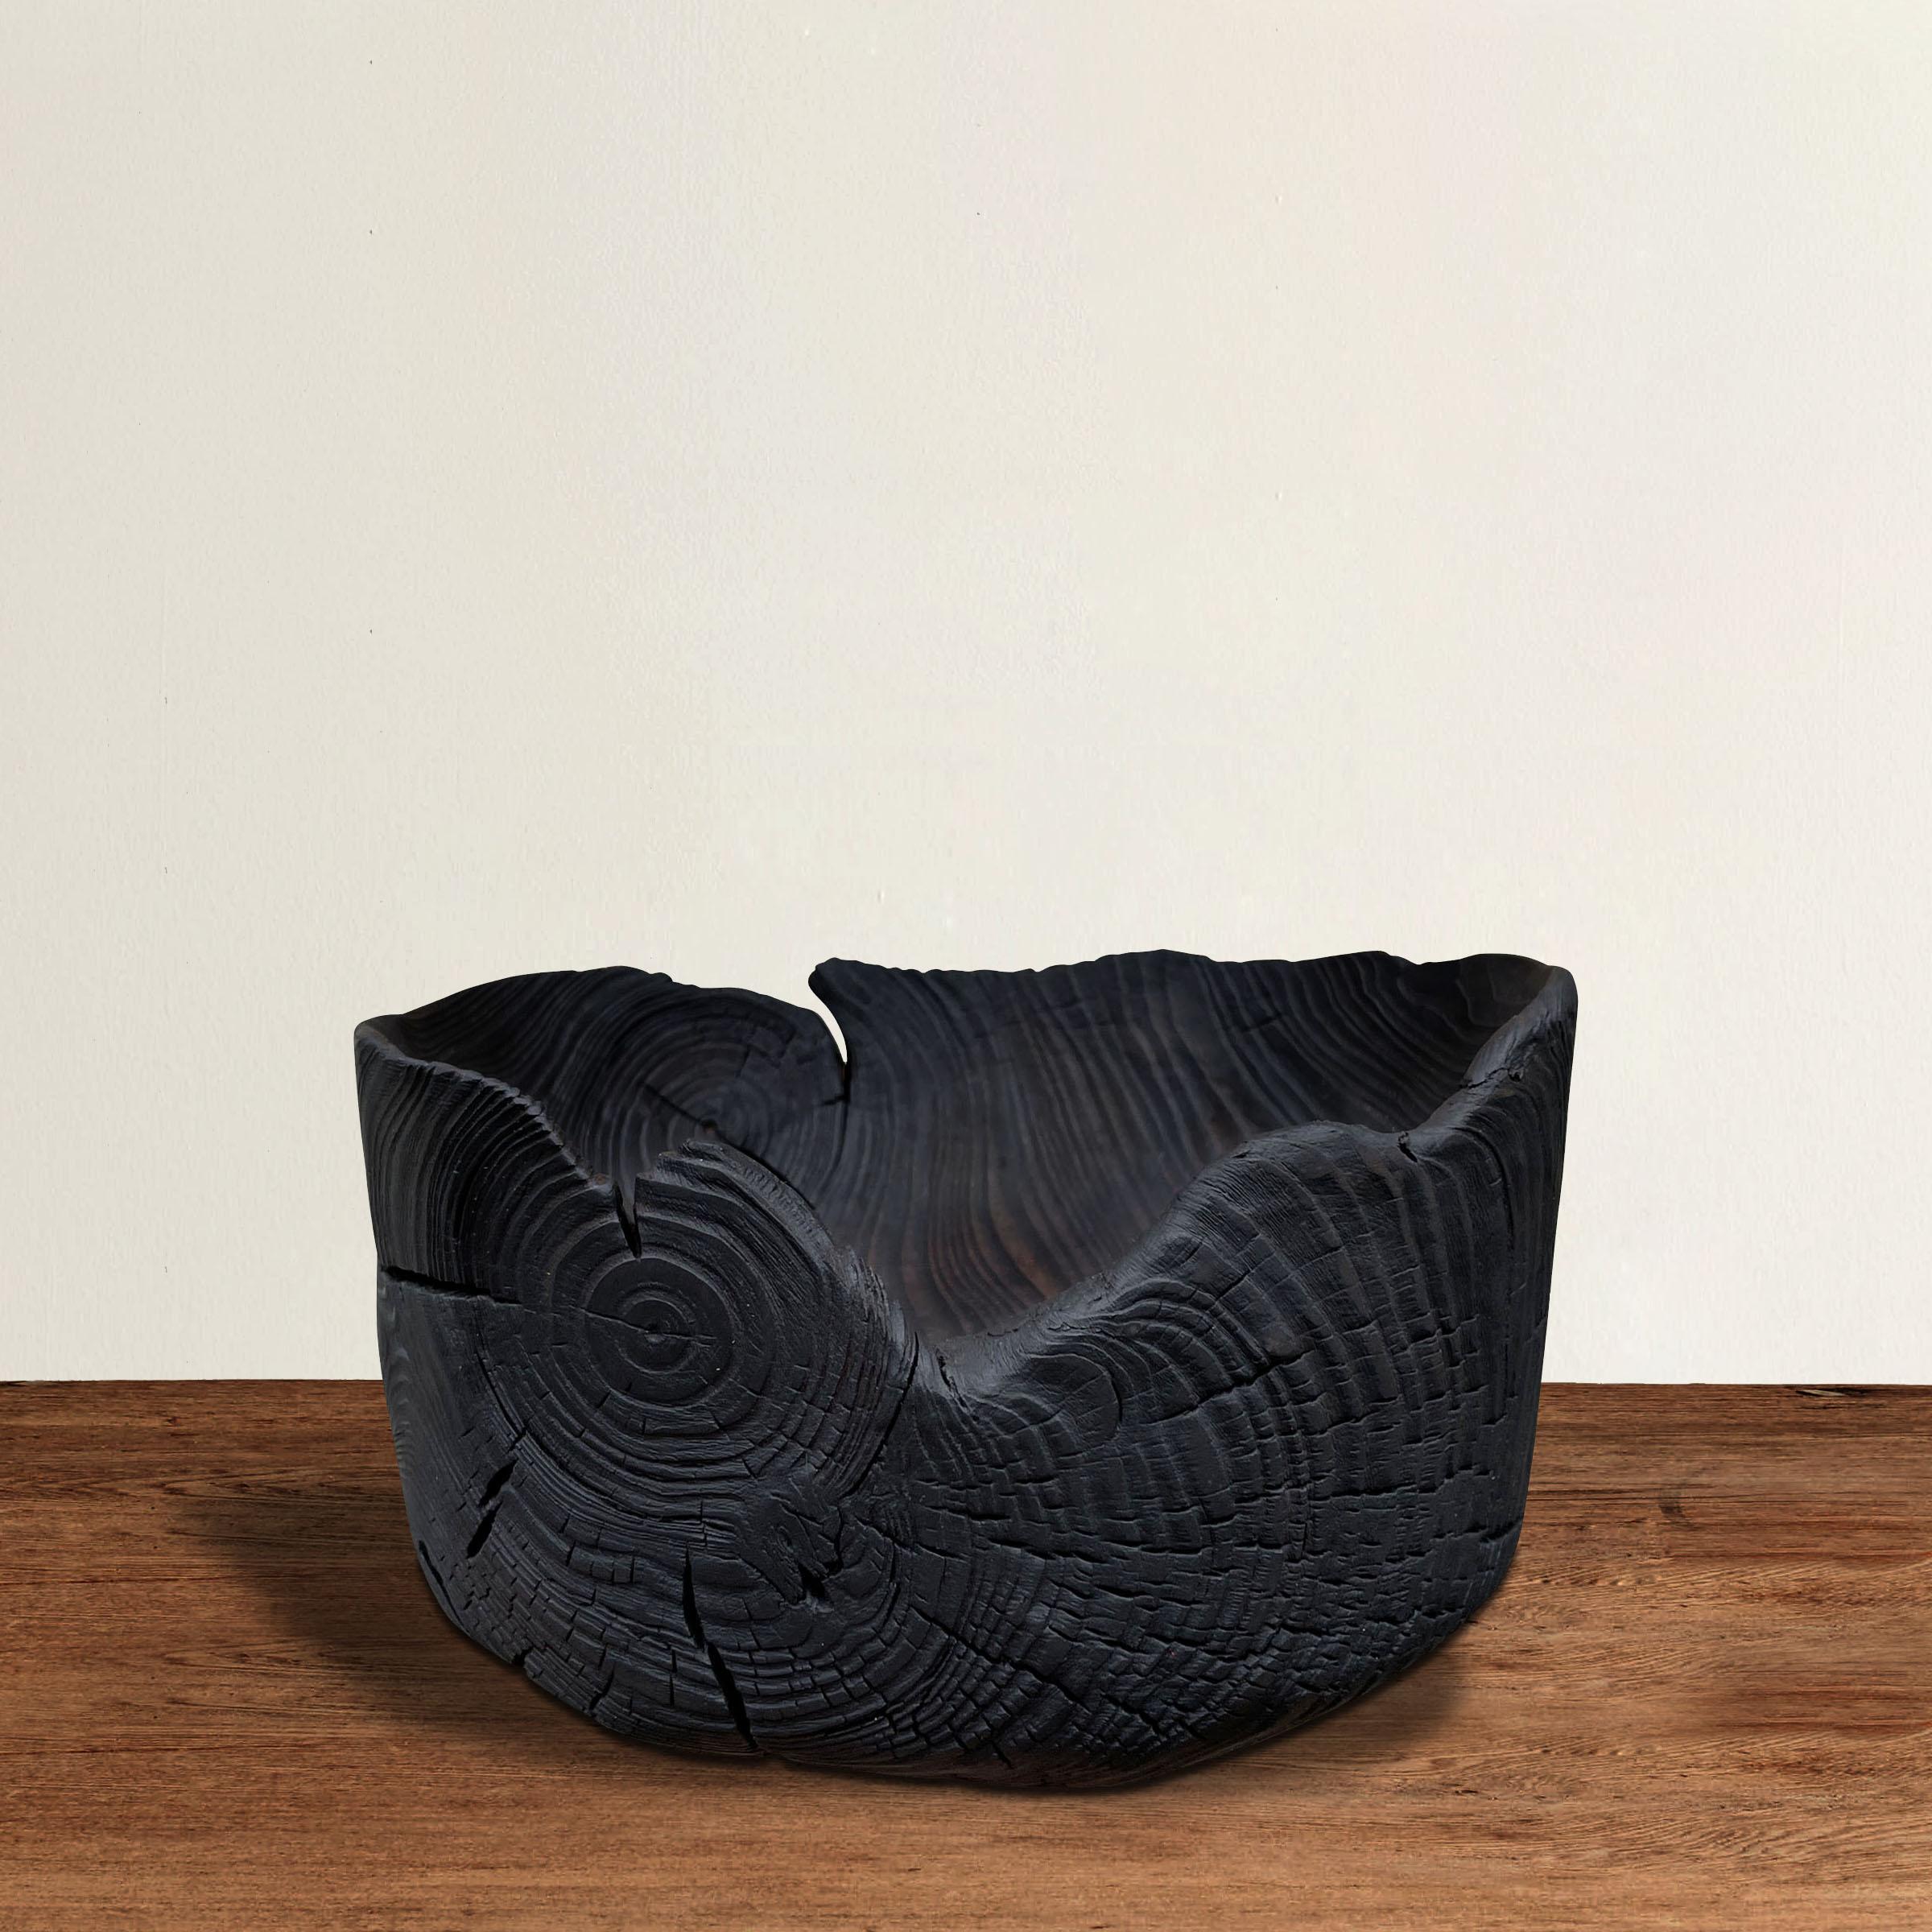 A fantastic Japanese bowl carved of one piece of pine and with a beautiful Yakisugi, or burned wood, finish. Traditionally, a yakisugi finish is applied to exterior siding of homes in Western Japan and was intended to improve the weather resistance